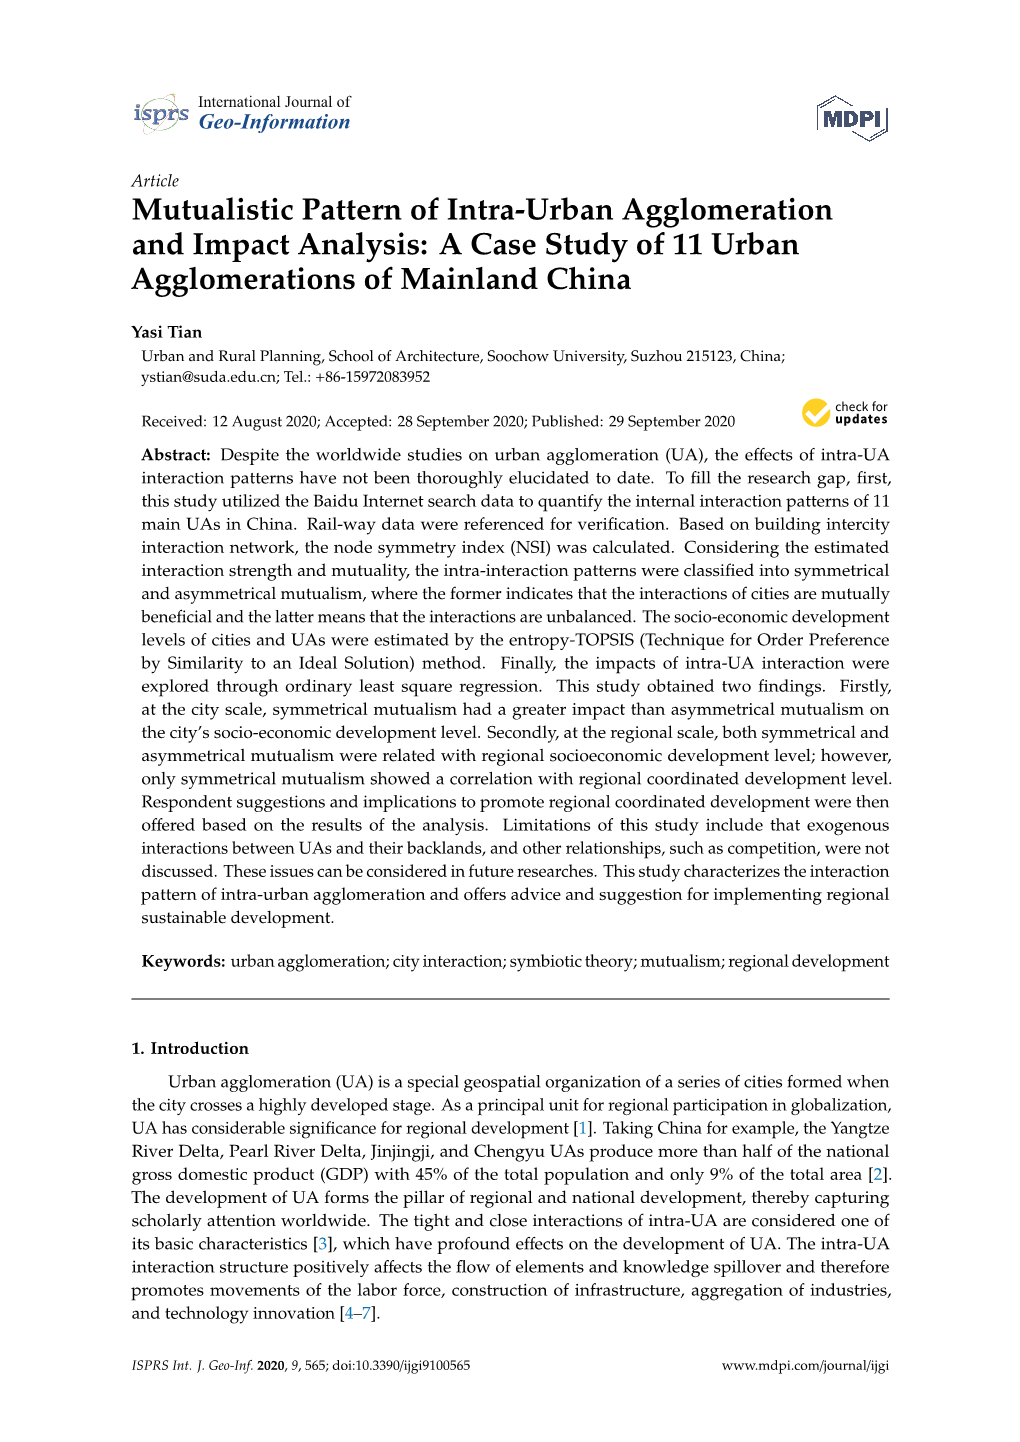 Mutualistic Pattern of Intra-Urban Agglomeration and Impact Analysis: a Case Study of 11 Urban Agglomerations of Mainland China